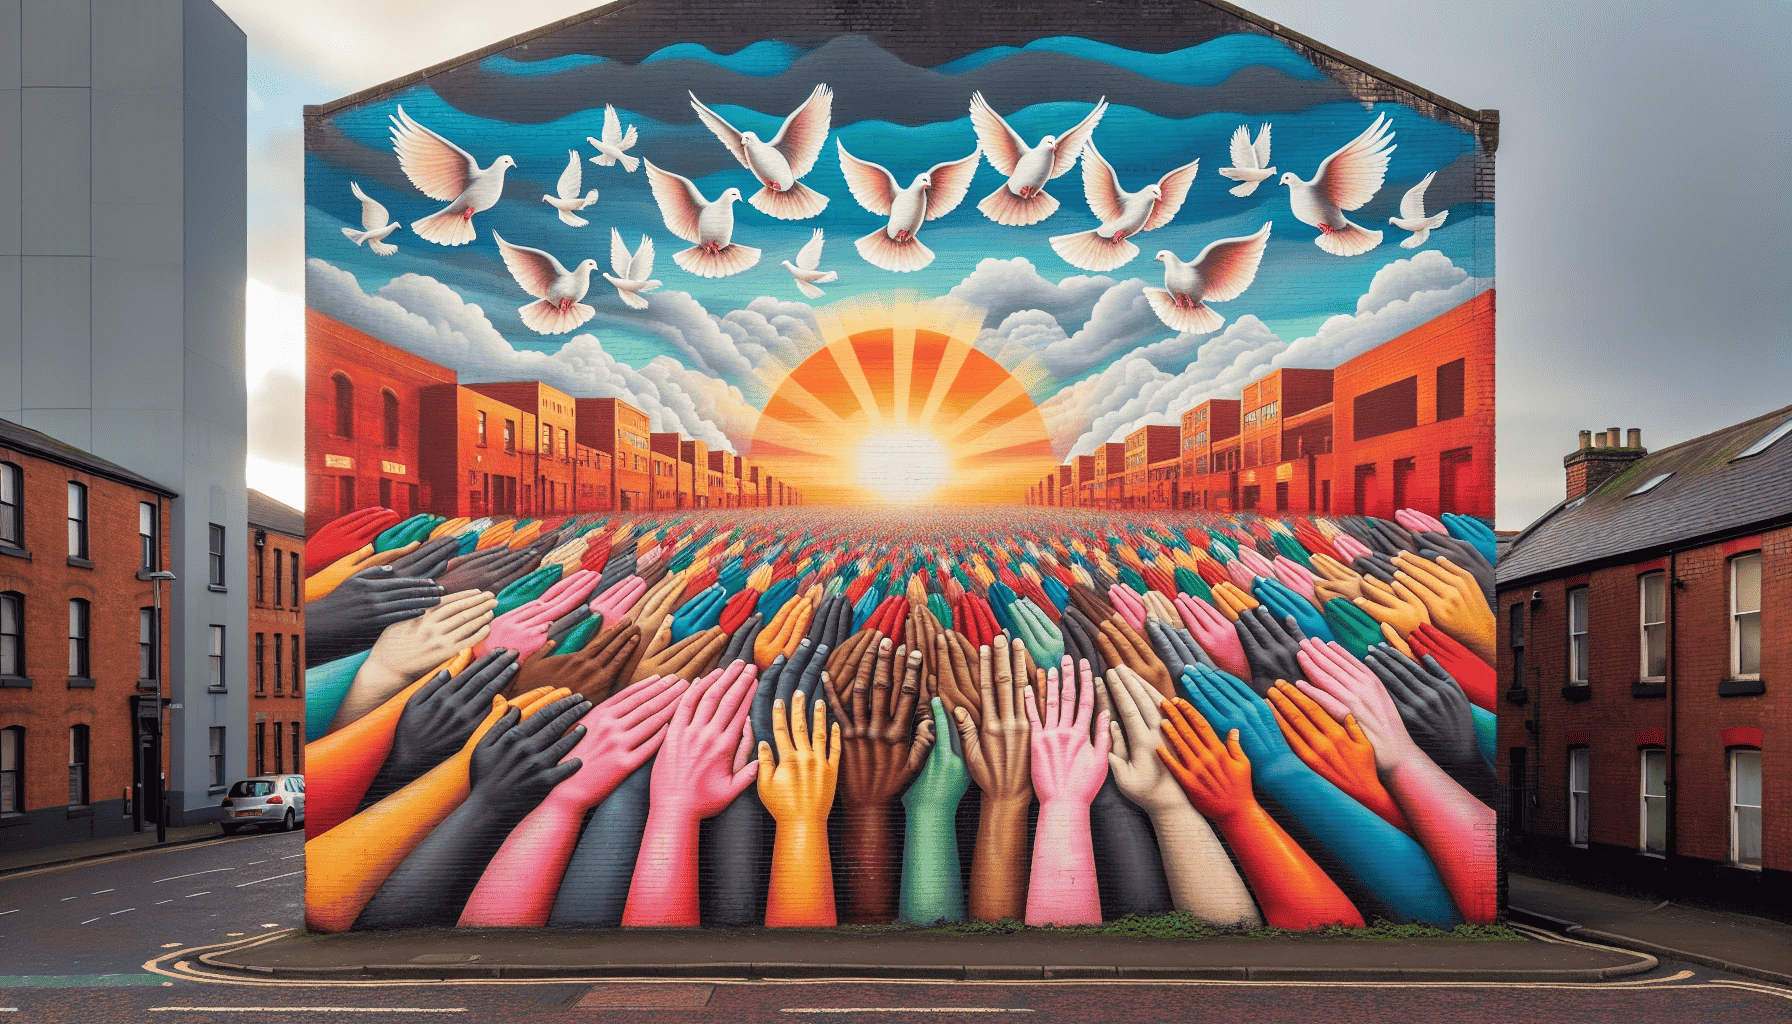 Non-sectarian and peace murals promoting unity in Belfast